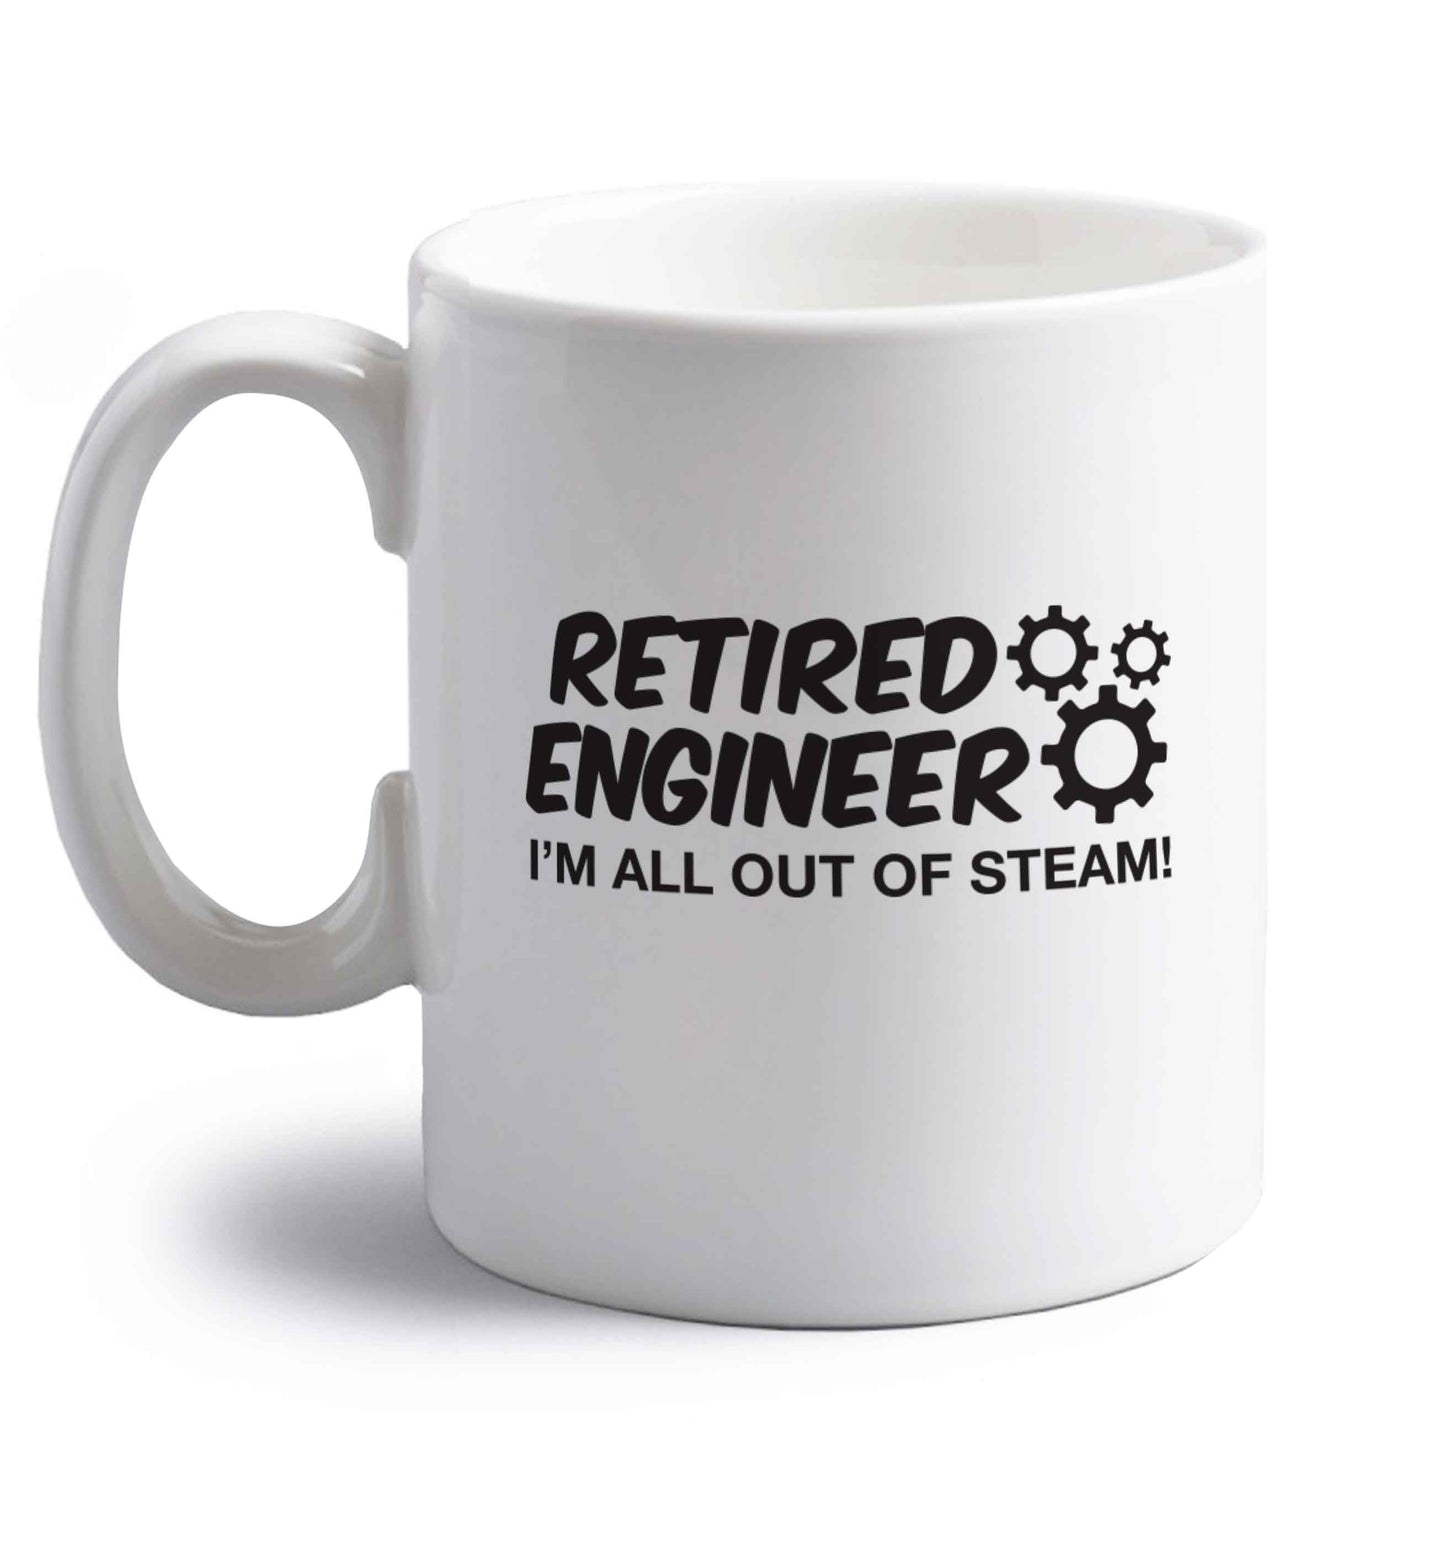 Retired engineer I'm all out of steam right handed white ceramic mug 